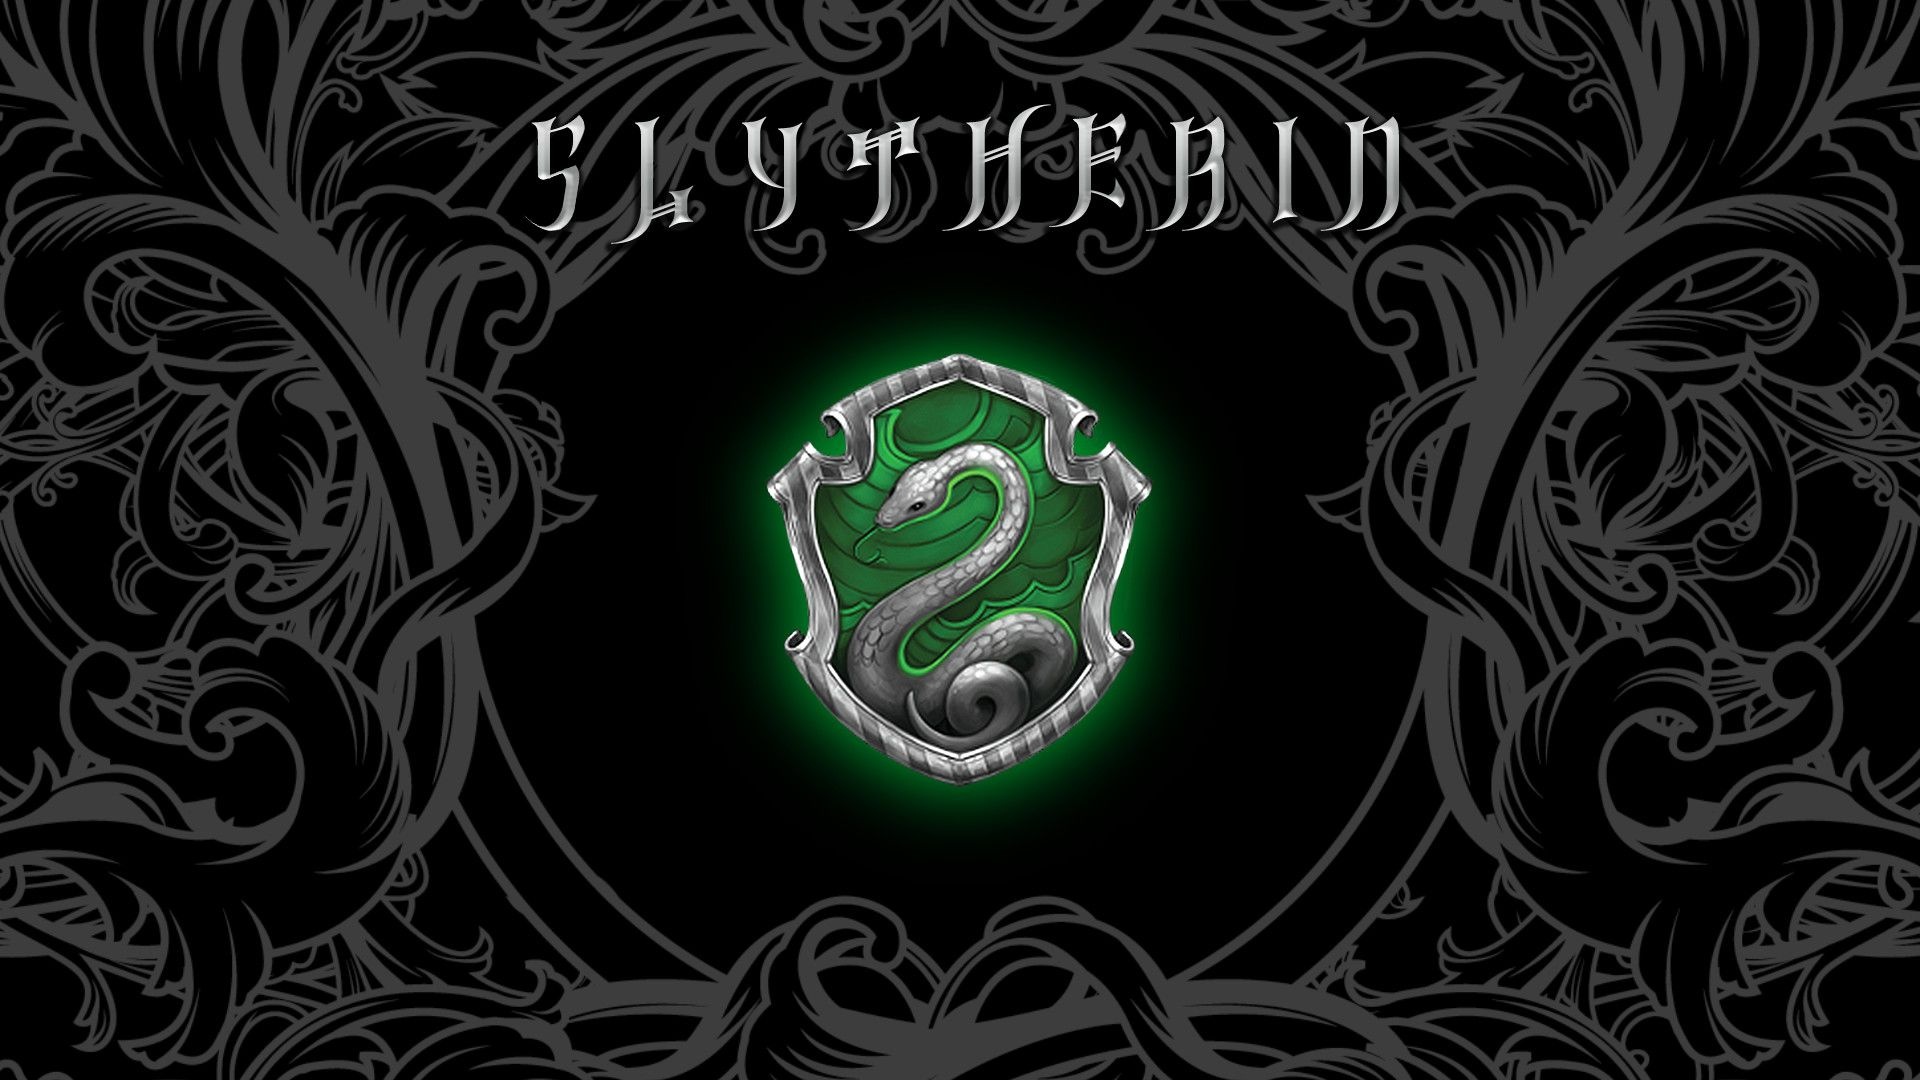 Slytherin laptop, Exclusive wallpapers, Device personalization, Distinctive vibe, 1920x1080 Full HD Desktop